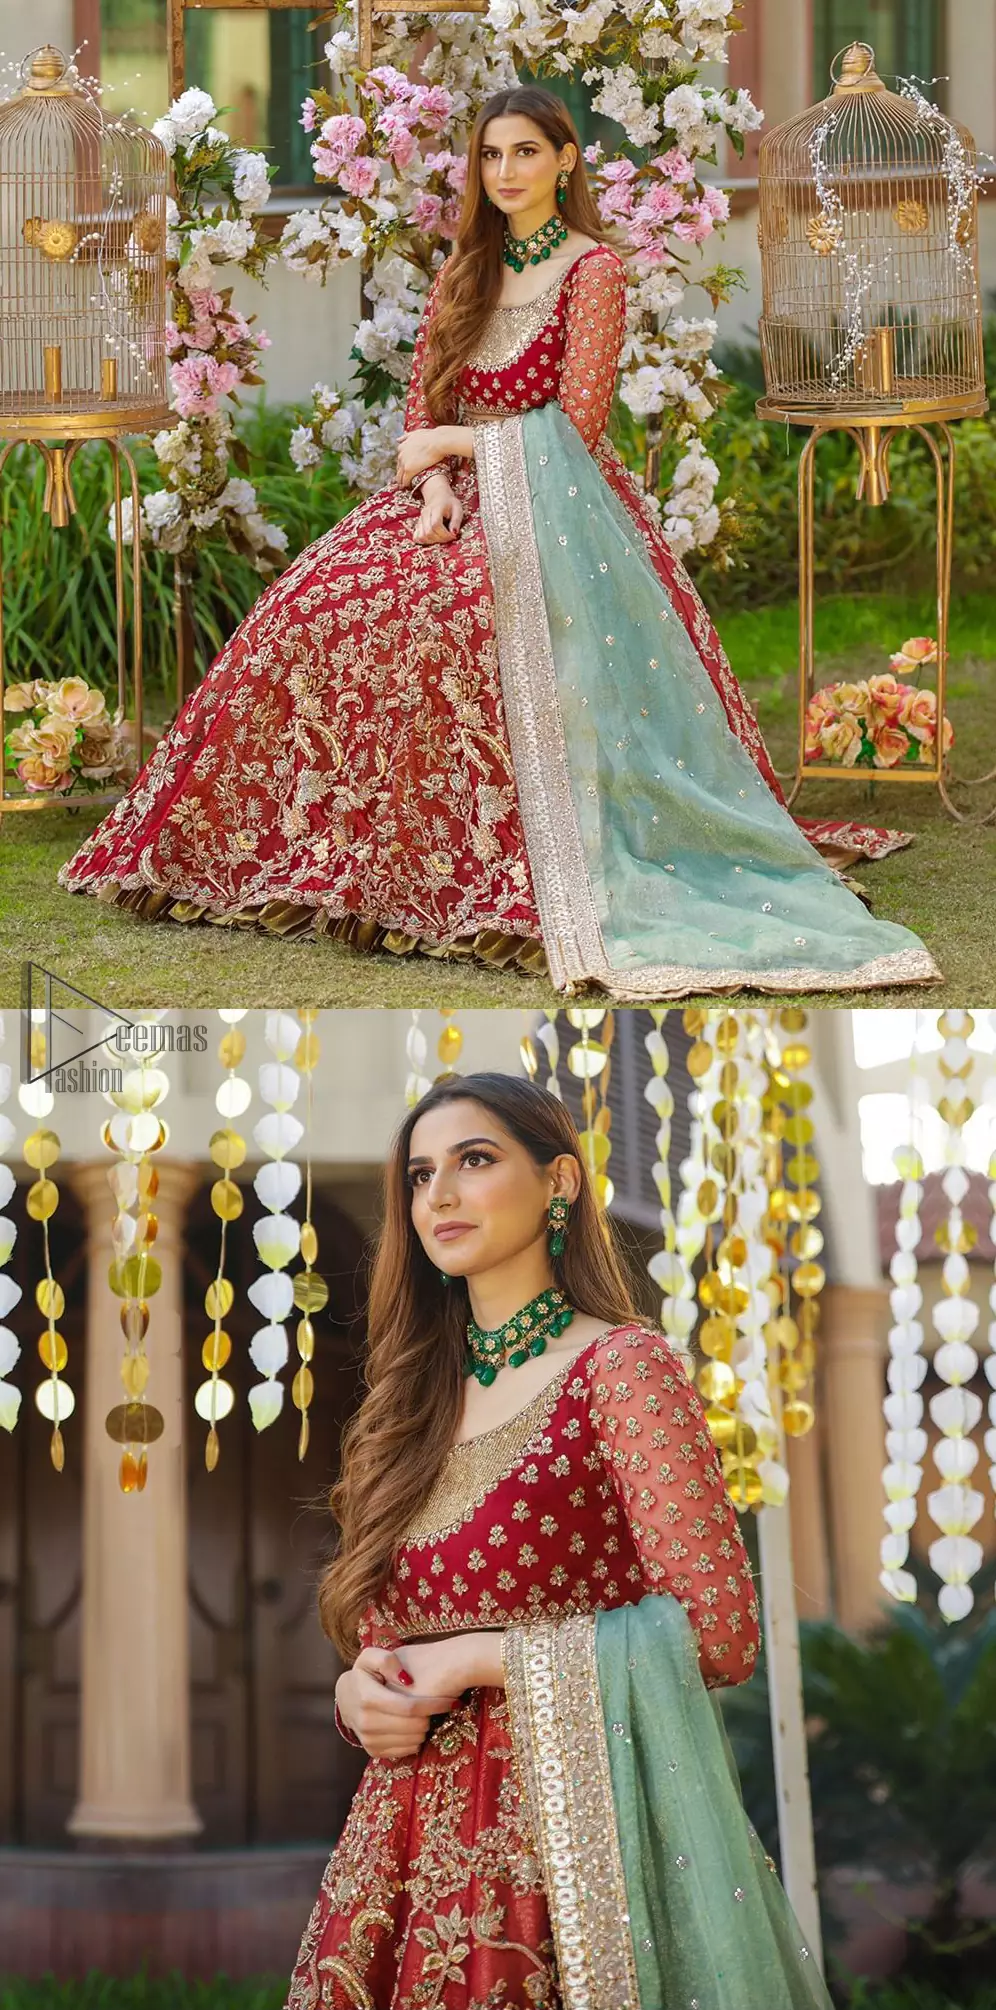 Make a special day even more magic with our exquisite bridal dress. This wedding dress is elegant and eye-catching in equal measure. Strike a breathtakingly elegant pose in this wedding dress, designed with a beautiful neckline embellished with sequins details and scattered tiny floral motifs all over. The lehenga is decorated with floral embroidery all over and finished with frilled fabric. The mint green organza dupatta with chann and finishing all around the edges makes the look complete.
